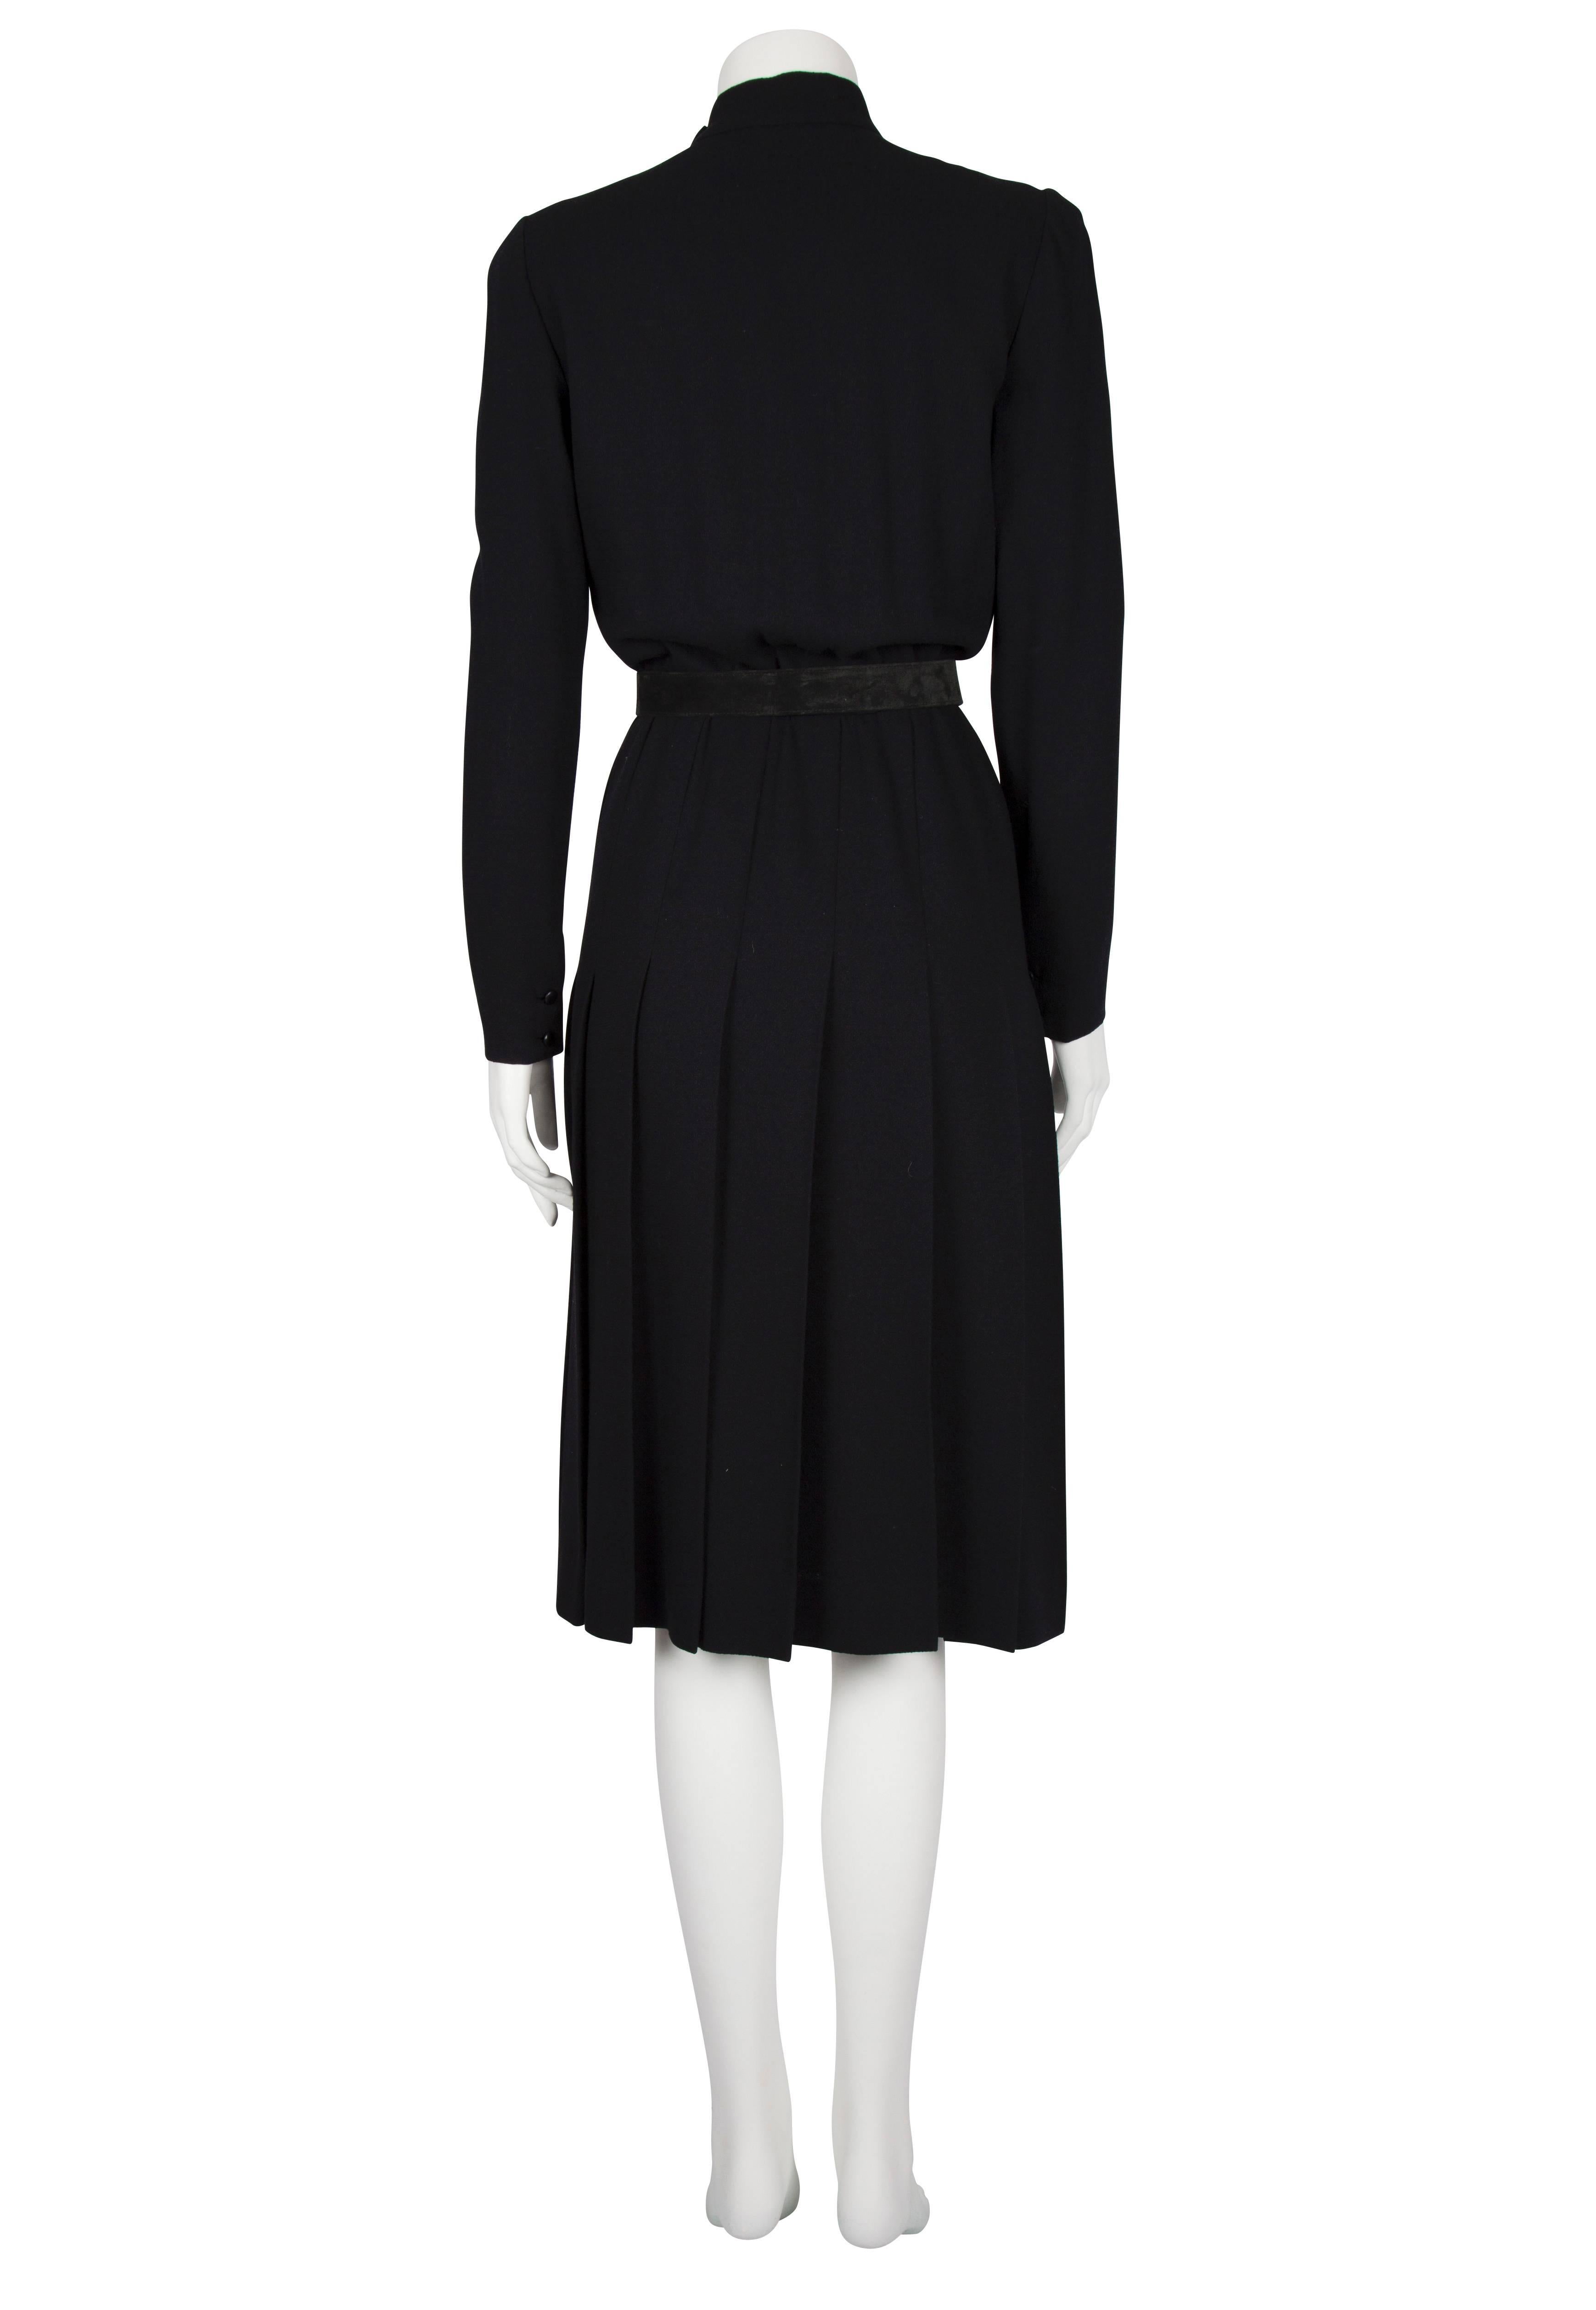 A/W 1979 Dior Couture Black Silk Crepe Button-Down Wrap Dress with Suede Belt For Sale 3